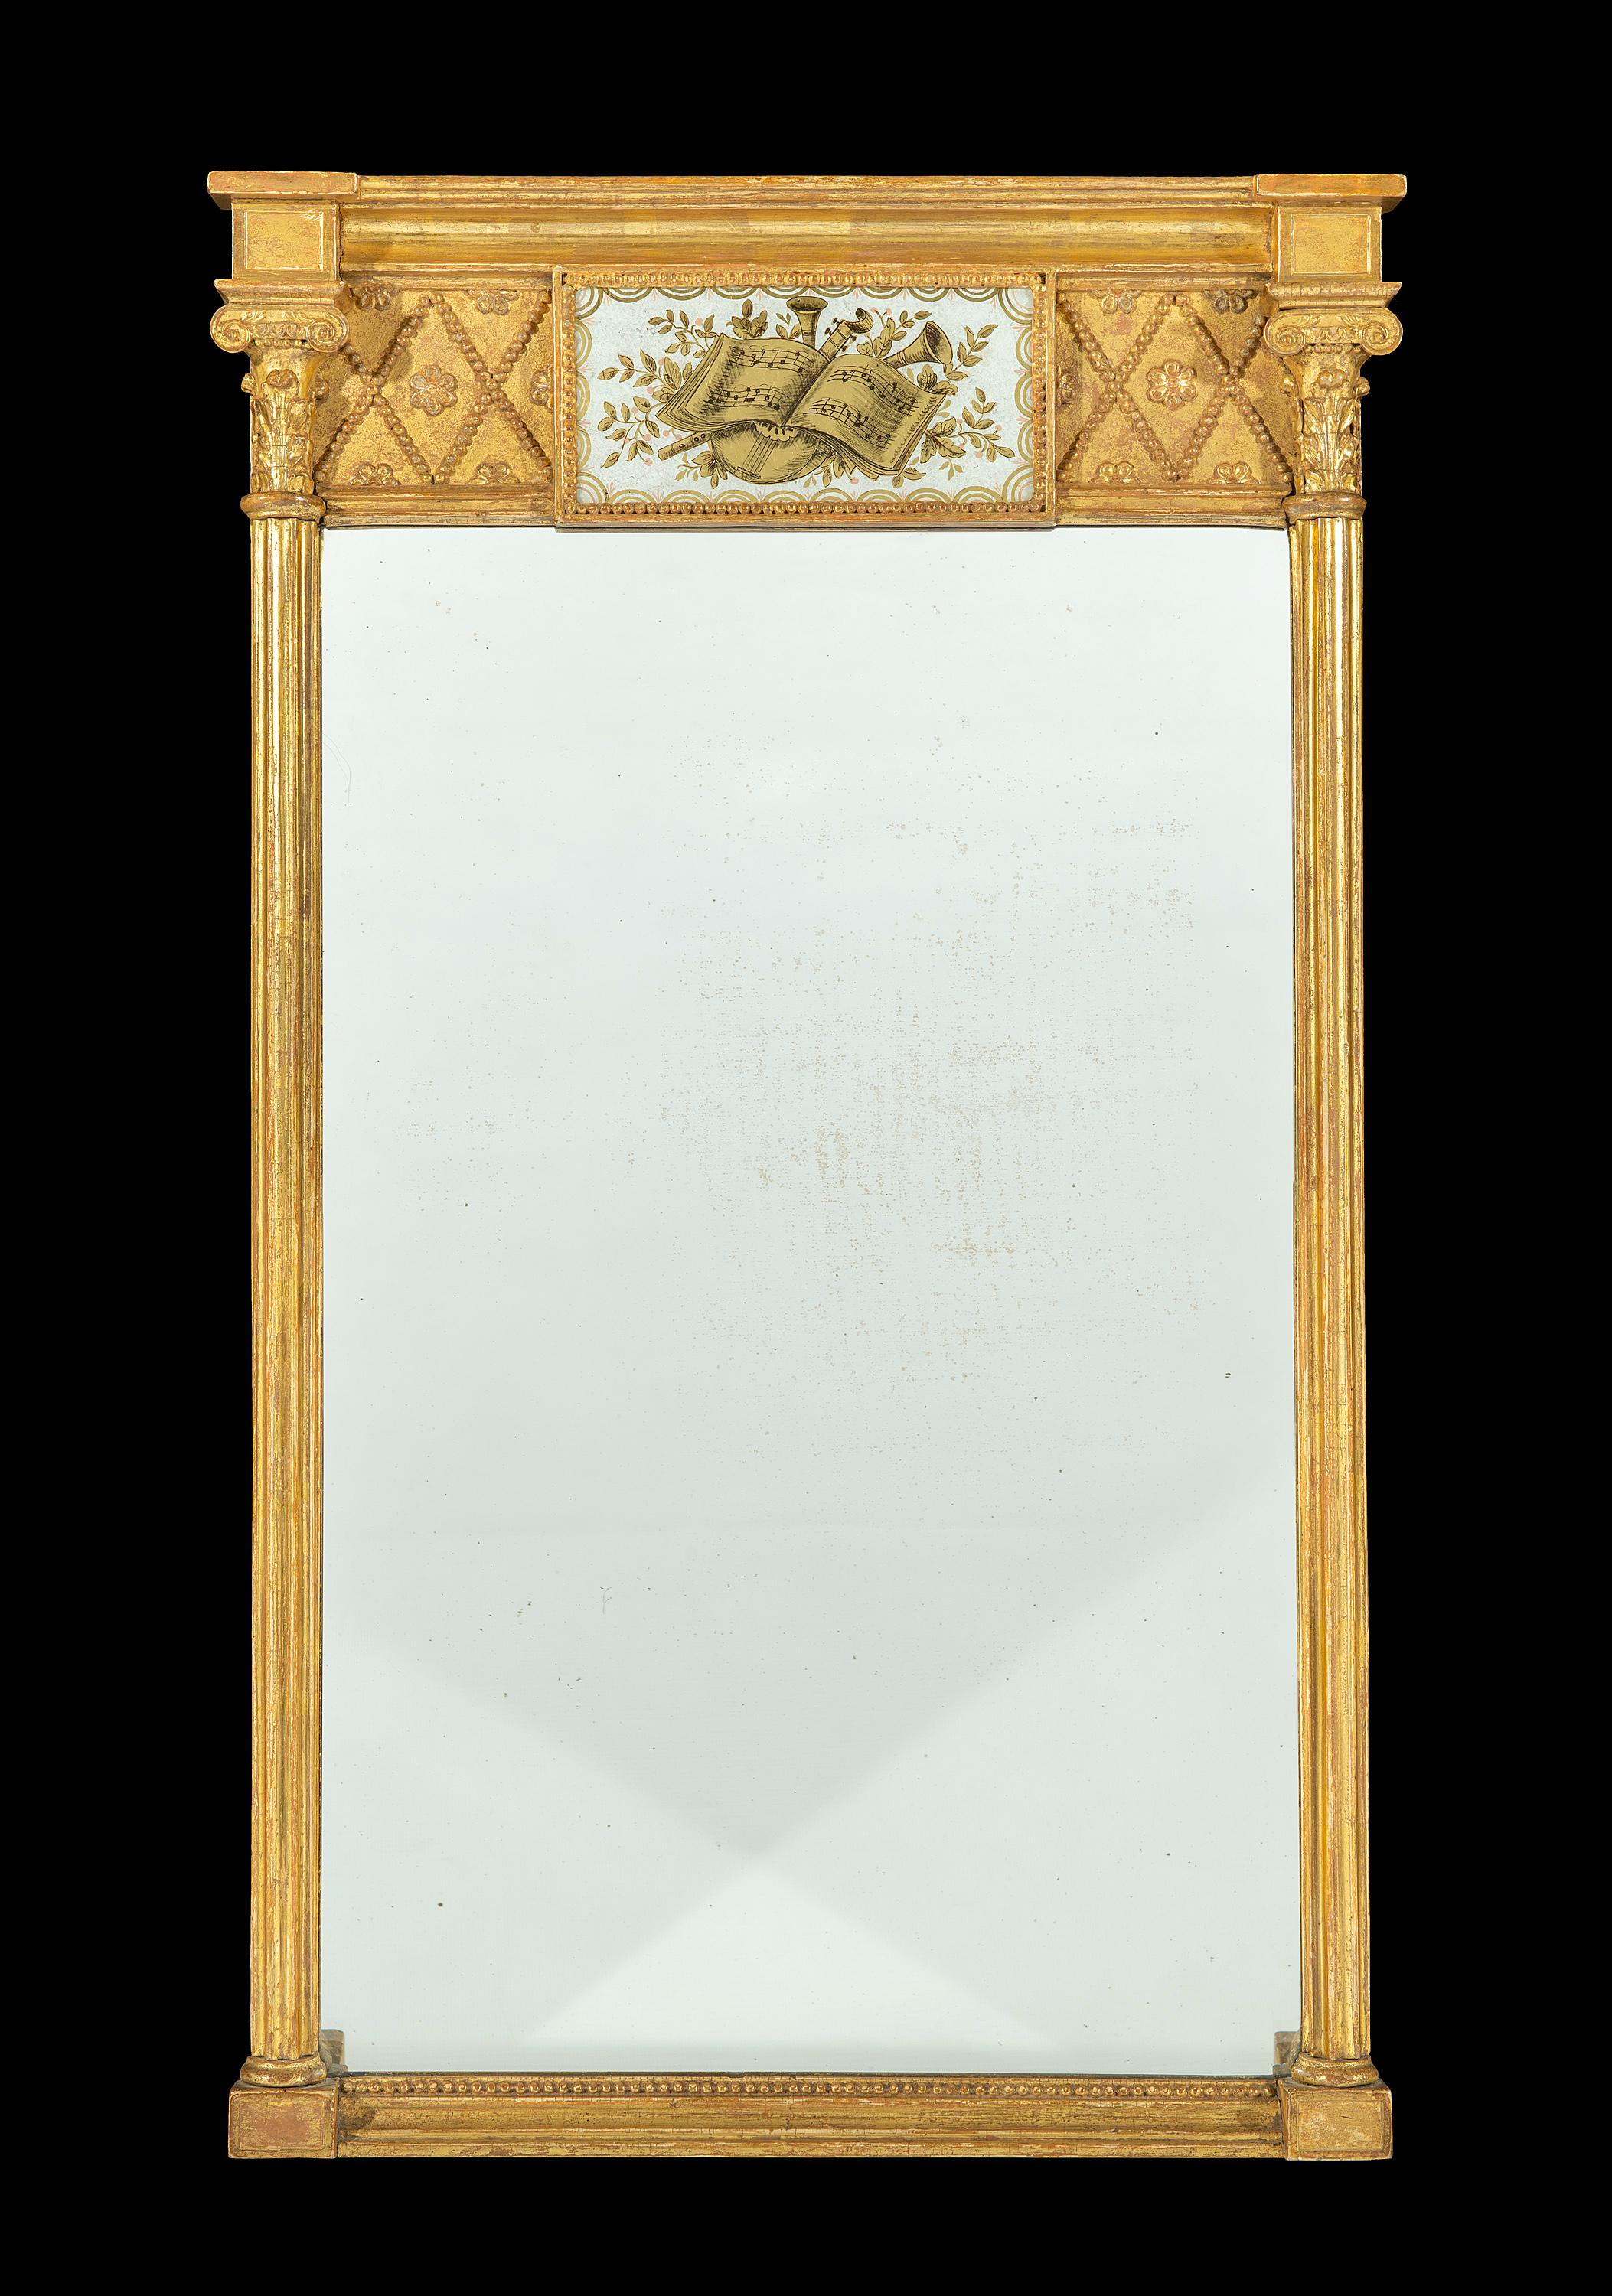 Early 19th century Regency period eglomisé carved giltwood pier mirror
The bevelled breakfront cornice sits above a musical themed eglomise centre panel and fine composite beaded mouldings and patera motifs which are of excellent quality. The